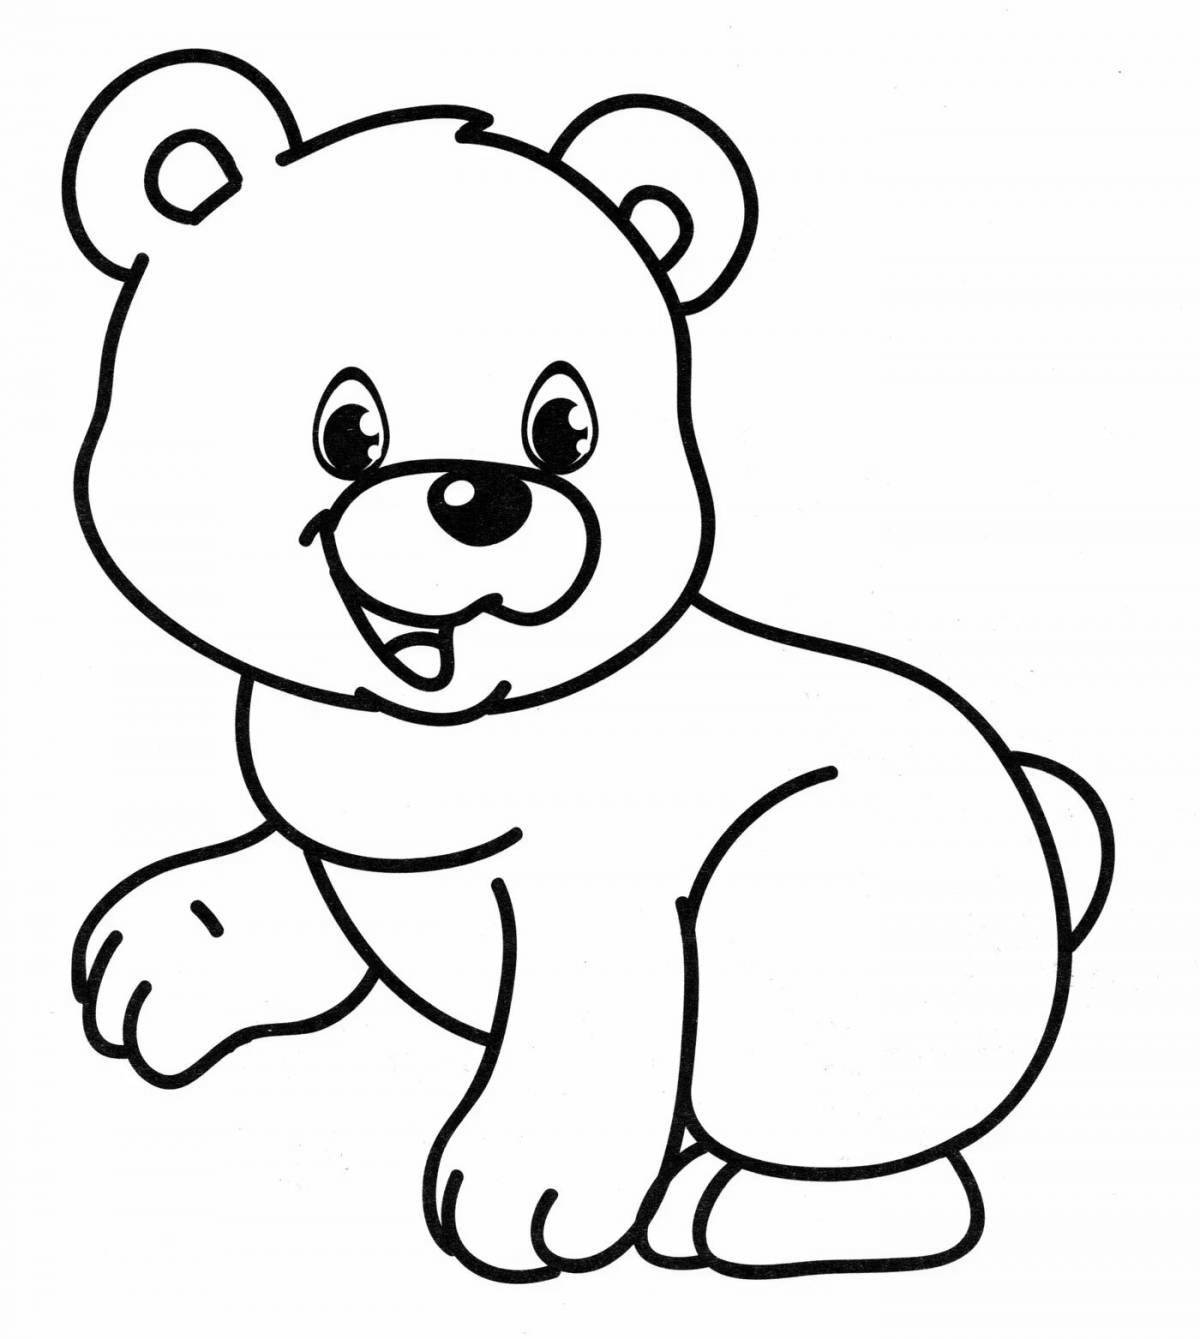 Humorous polar bear coloring book for children 2-3 years old